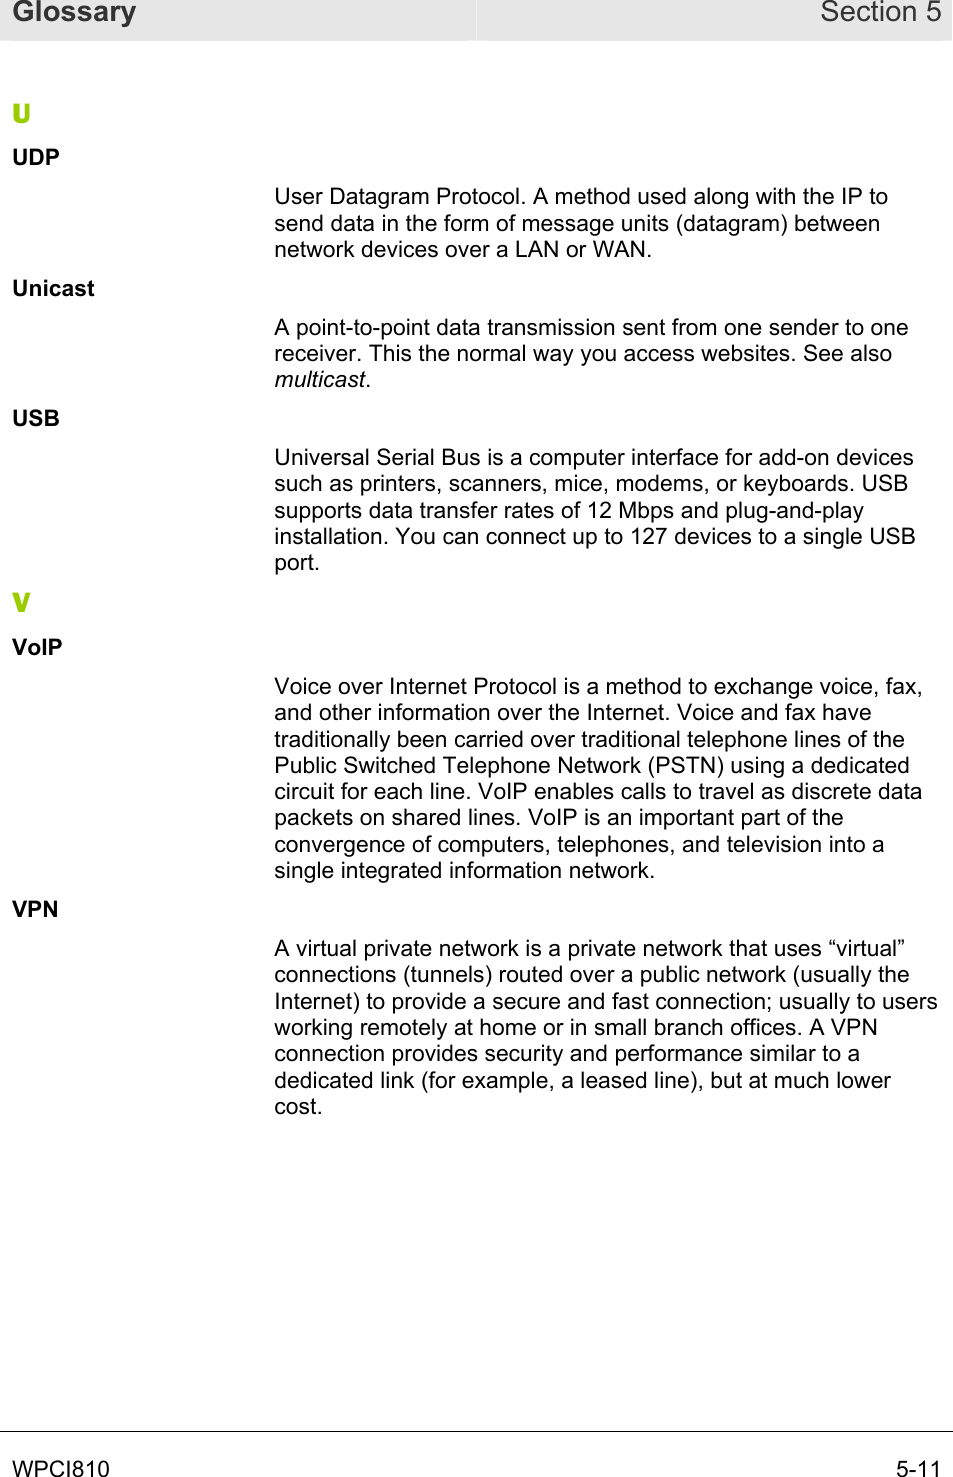 Glossary Section 5 WPCI810       5-11 U UDP User Datagram Protocol. A method used along with the IP to send data in the form of message units (datagram) between network devices over a LAN or WAN.  Unicast A point-to-point data transmission sent from one sender to one receiver. This the normal way you access websites. See also multicast. USB Universal Serial Bus is a computer interface for add-on devices such as printers, scanners, mice, modems, or keyboards. USB supports data transfer rates of 12 Mbps and plug-and-play installation. You can connect up to 127 devices to a single USB port. V VoIP Voice over Internet Protocol is a method to exchange voice, fax, and other information over the Internet. Voice and fax have traditionally been carried over traditional telephone lines of the Public Switched Telephone Network (PSTN) using a dedicated circuit for each line. VoIP enables calls to travel as discrete data packets on shared lines. VoIP is an important part of the convergence of computers, telephones, and television into a single integrated information network. VPN A virtual private network is a private network that uses “virtual” connections (tunnels) routed over a public network (usually the Internet) to provide a secure and fast connection; usually to users working remotely at home or in small branch offices. A VPN connection provides security and performance similar to a dedicated link (for example, a leased line), but at much lower cost. 